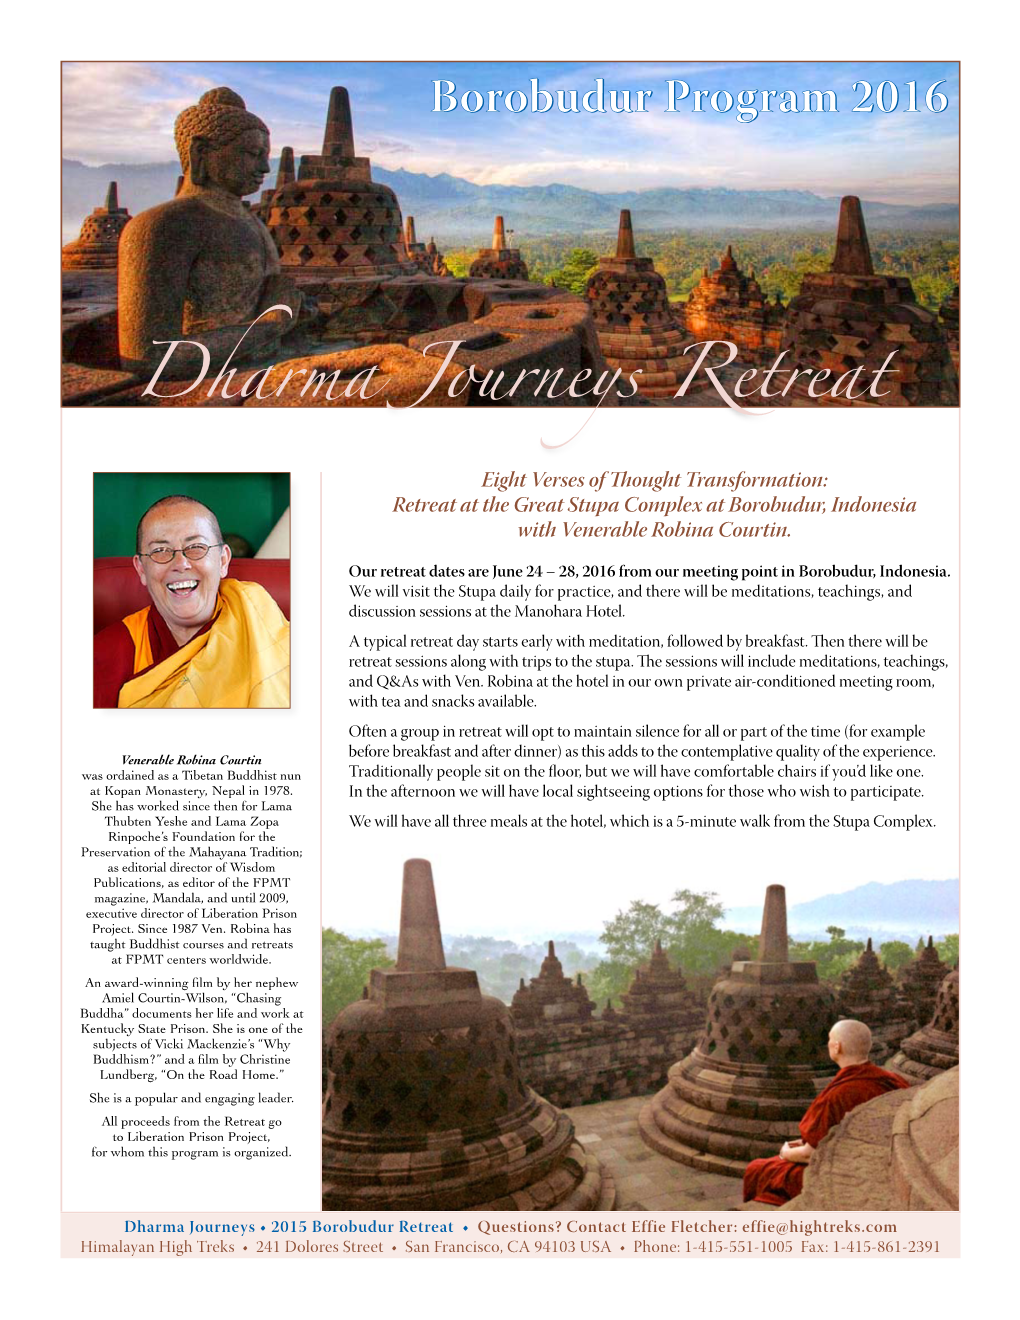 Dharma Journeys Retreat Eight Verses of Thought Transformation: Retreat at the Great Stupa Complex at Borobudur, Indonesia with Venerable Robina Courtin